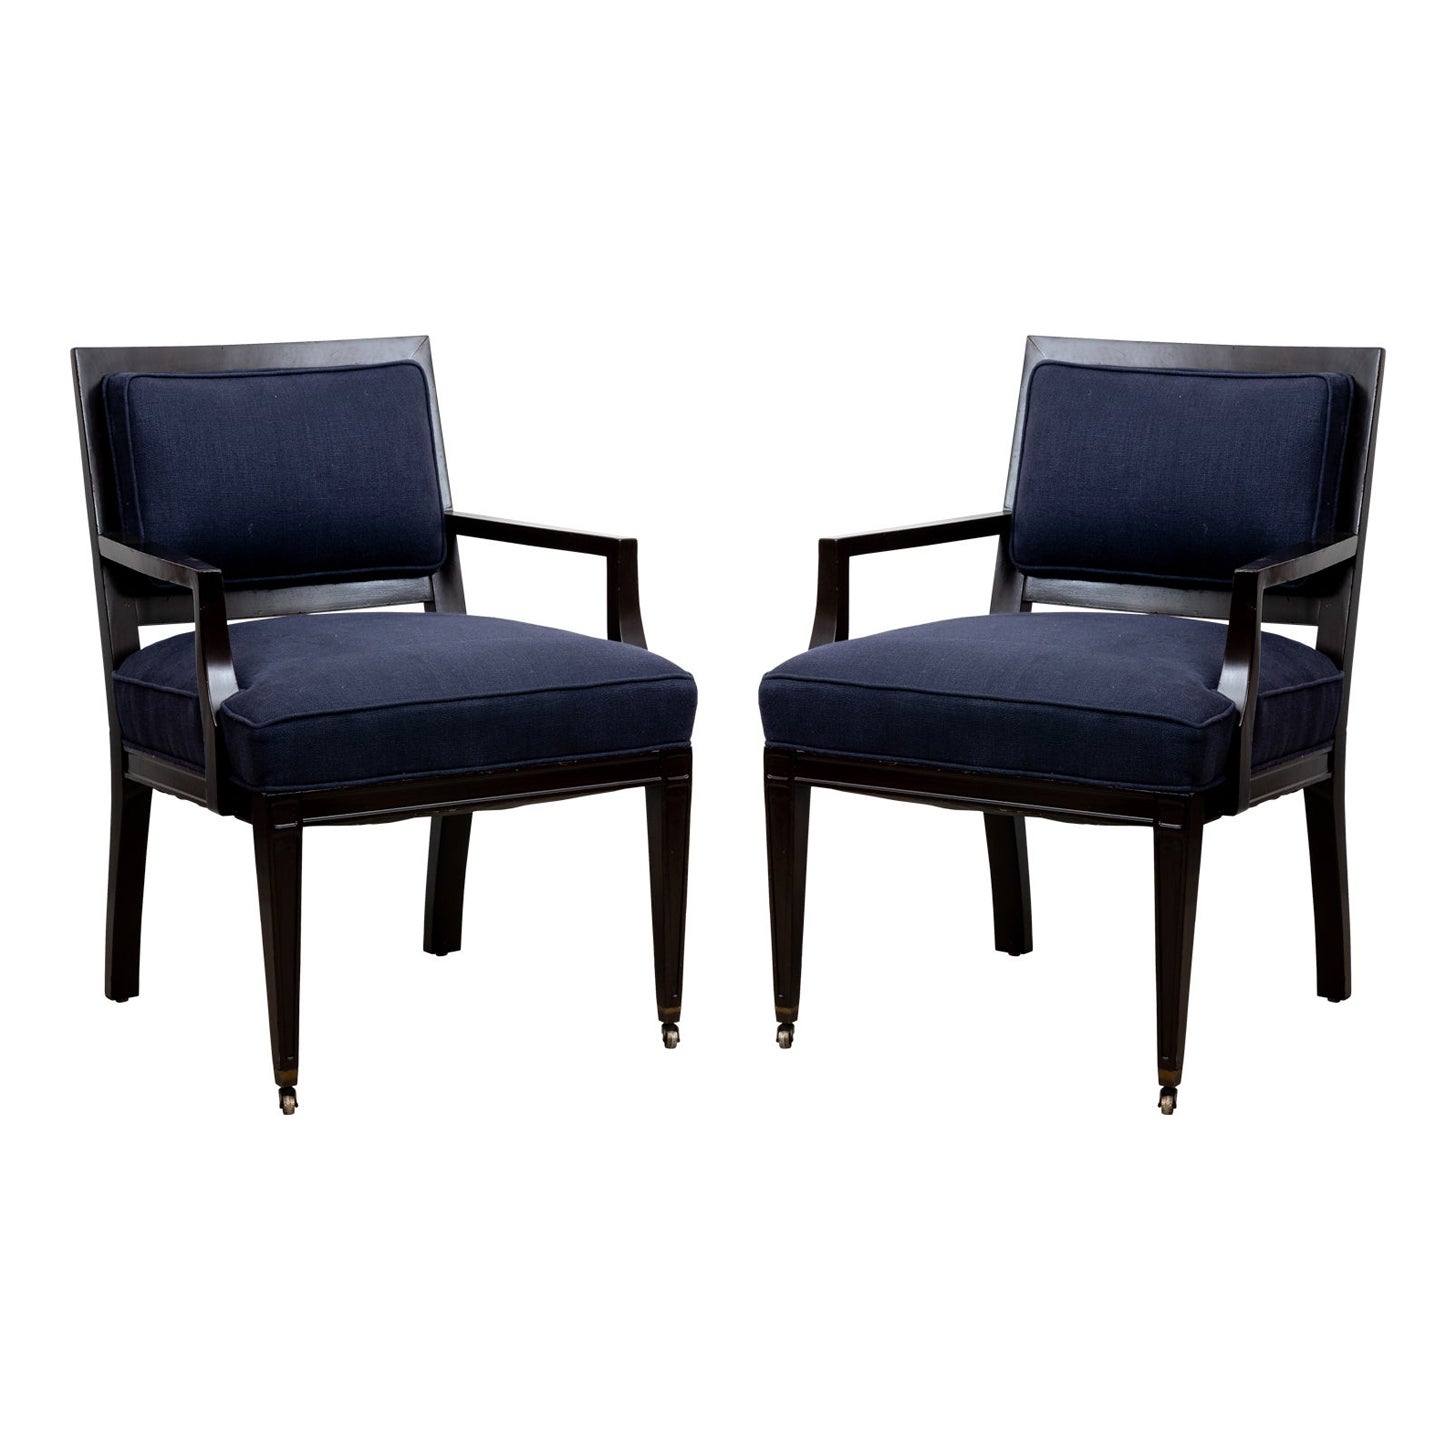 Pair of Mid-Century Modern Square Back Armchairs